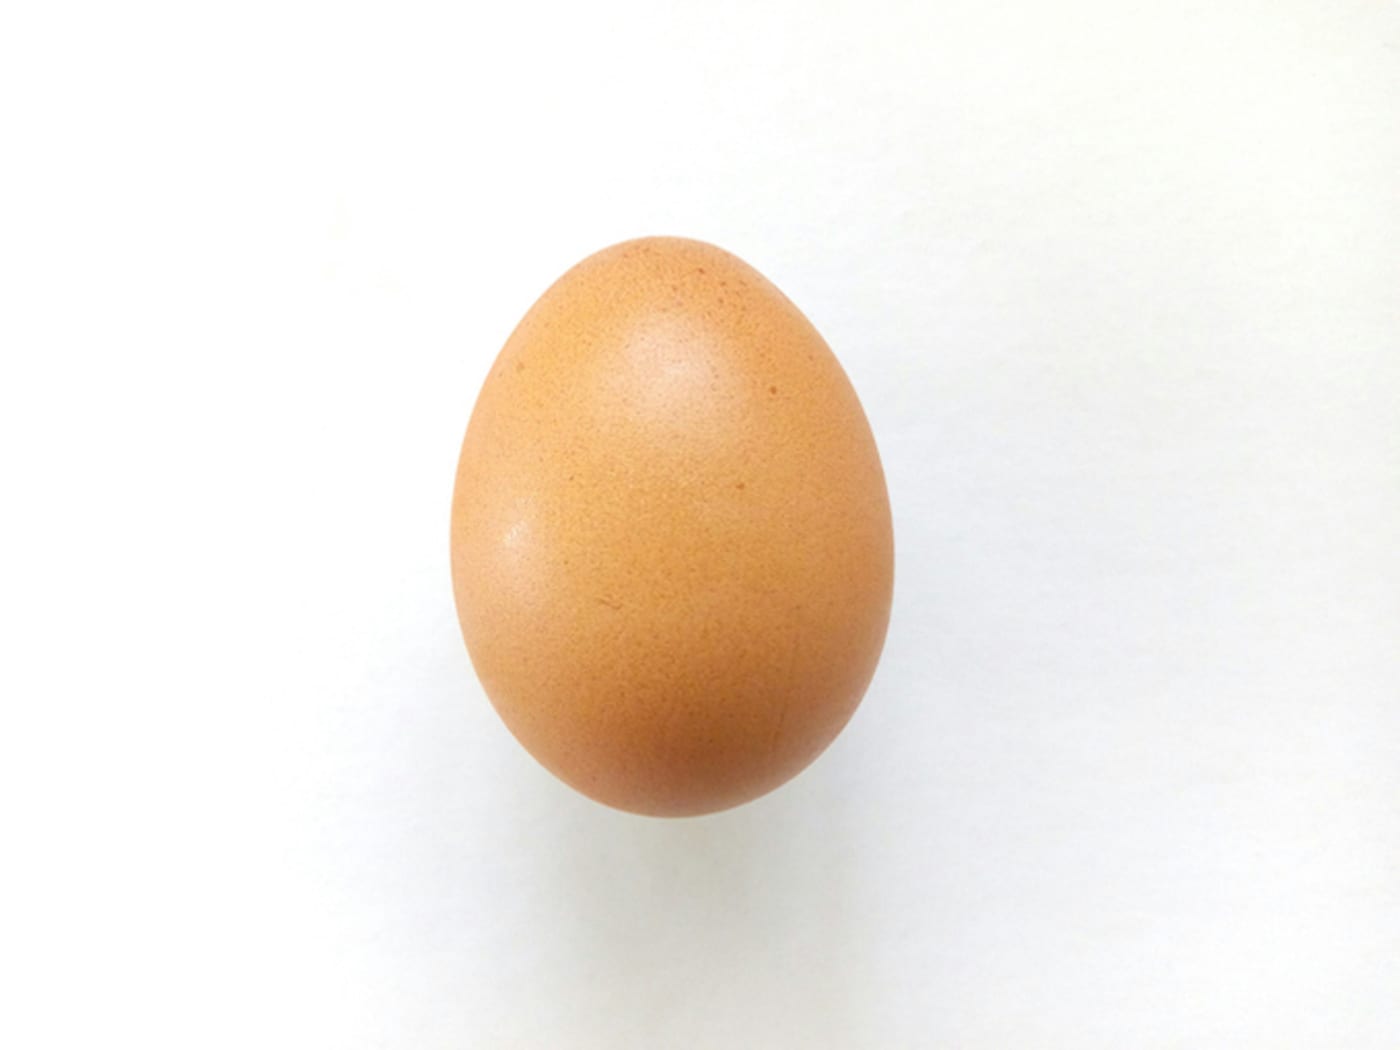 This is a picture of an Egg.